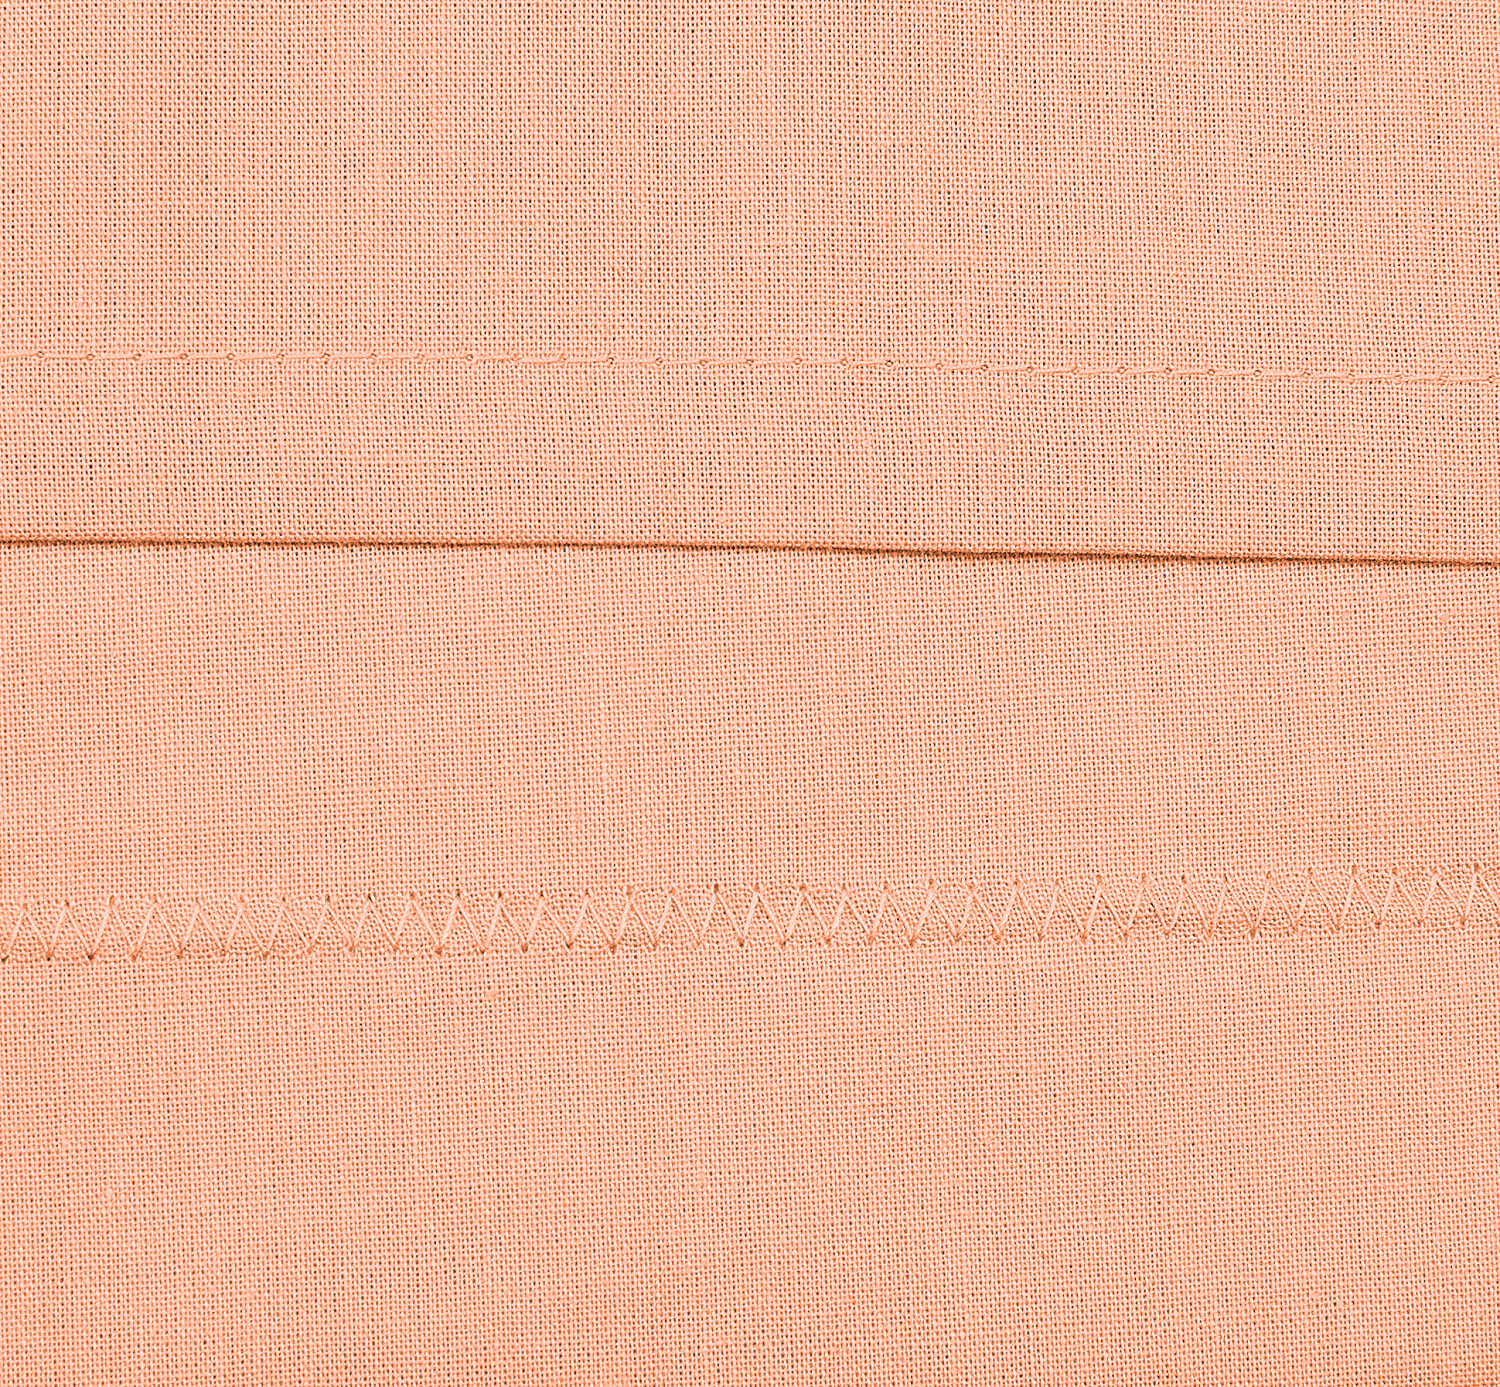 Kuber Industries Breathable & Soft Cotton Pillow Cover For Sofa, Couch, Bed - 29x20 Inch,(Peach)